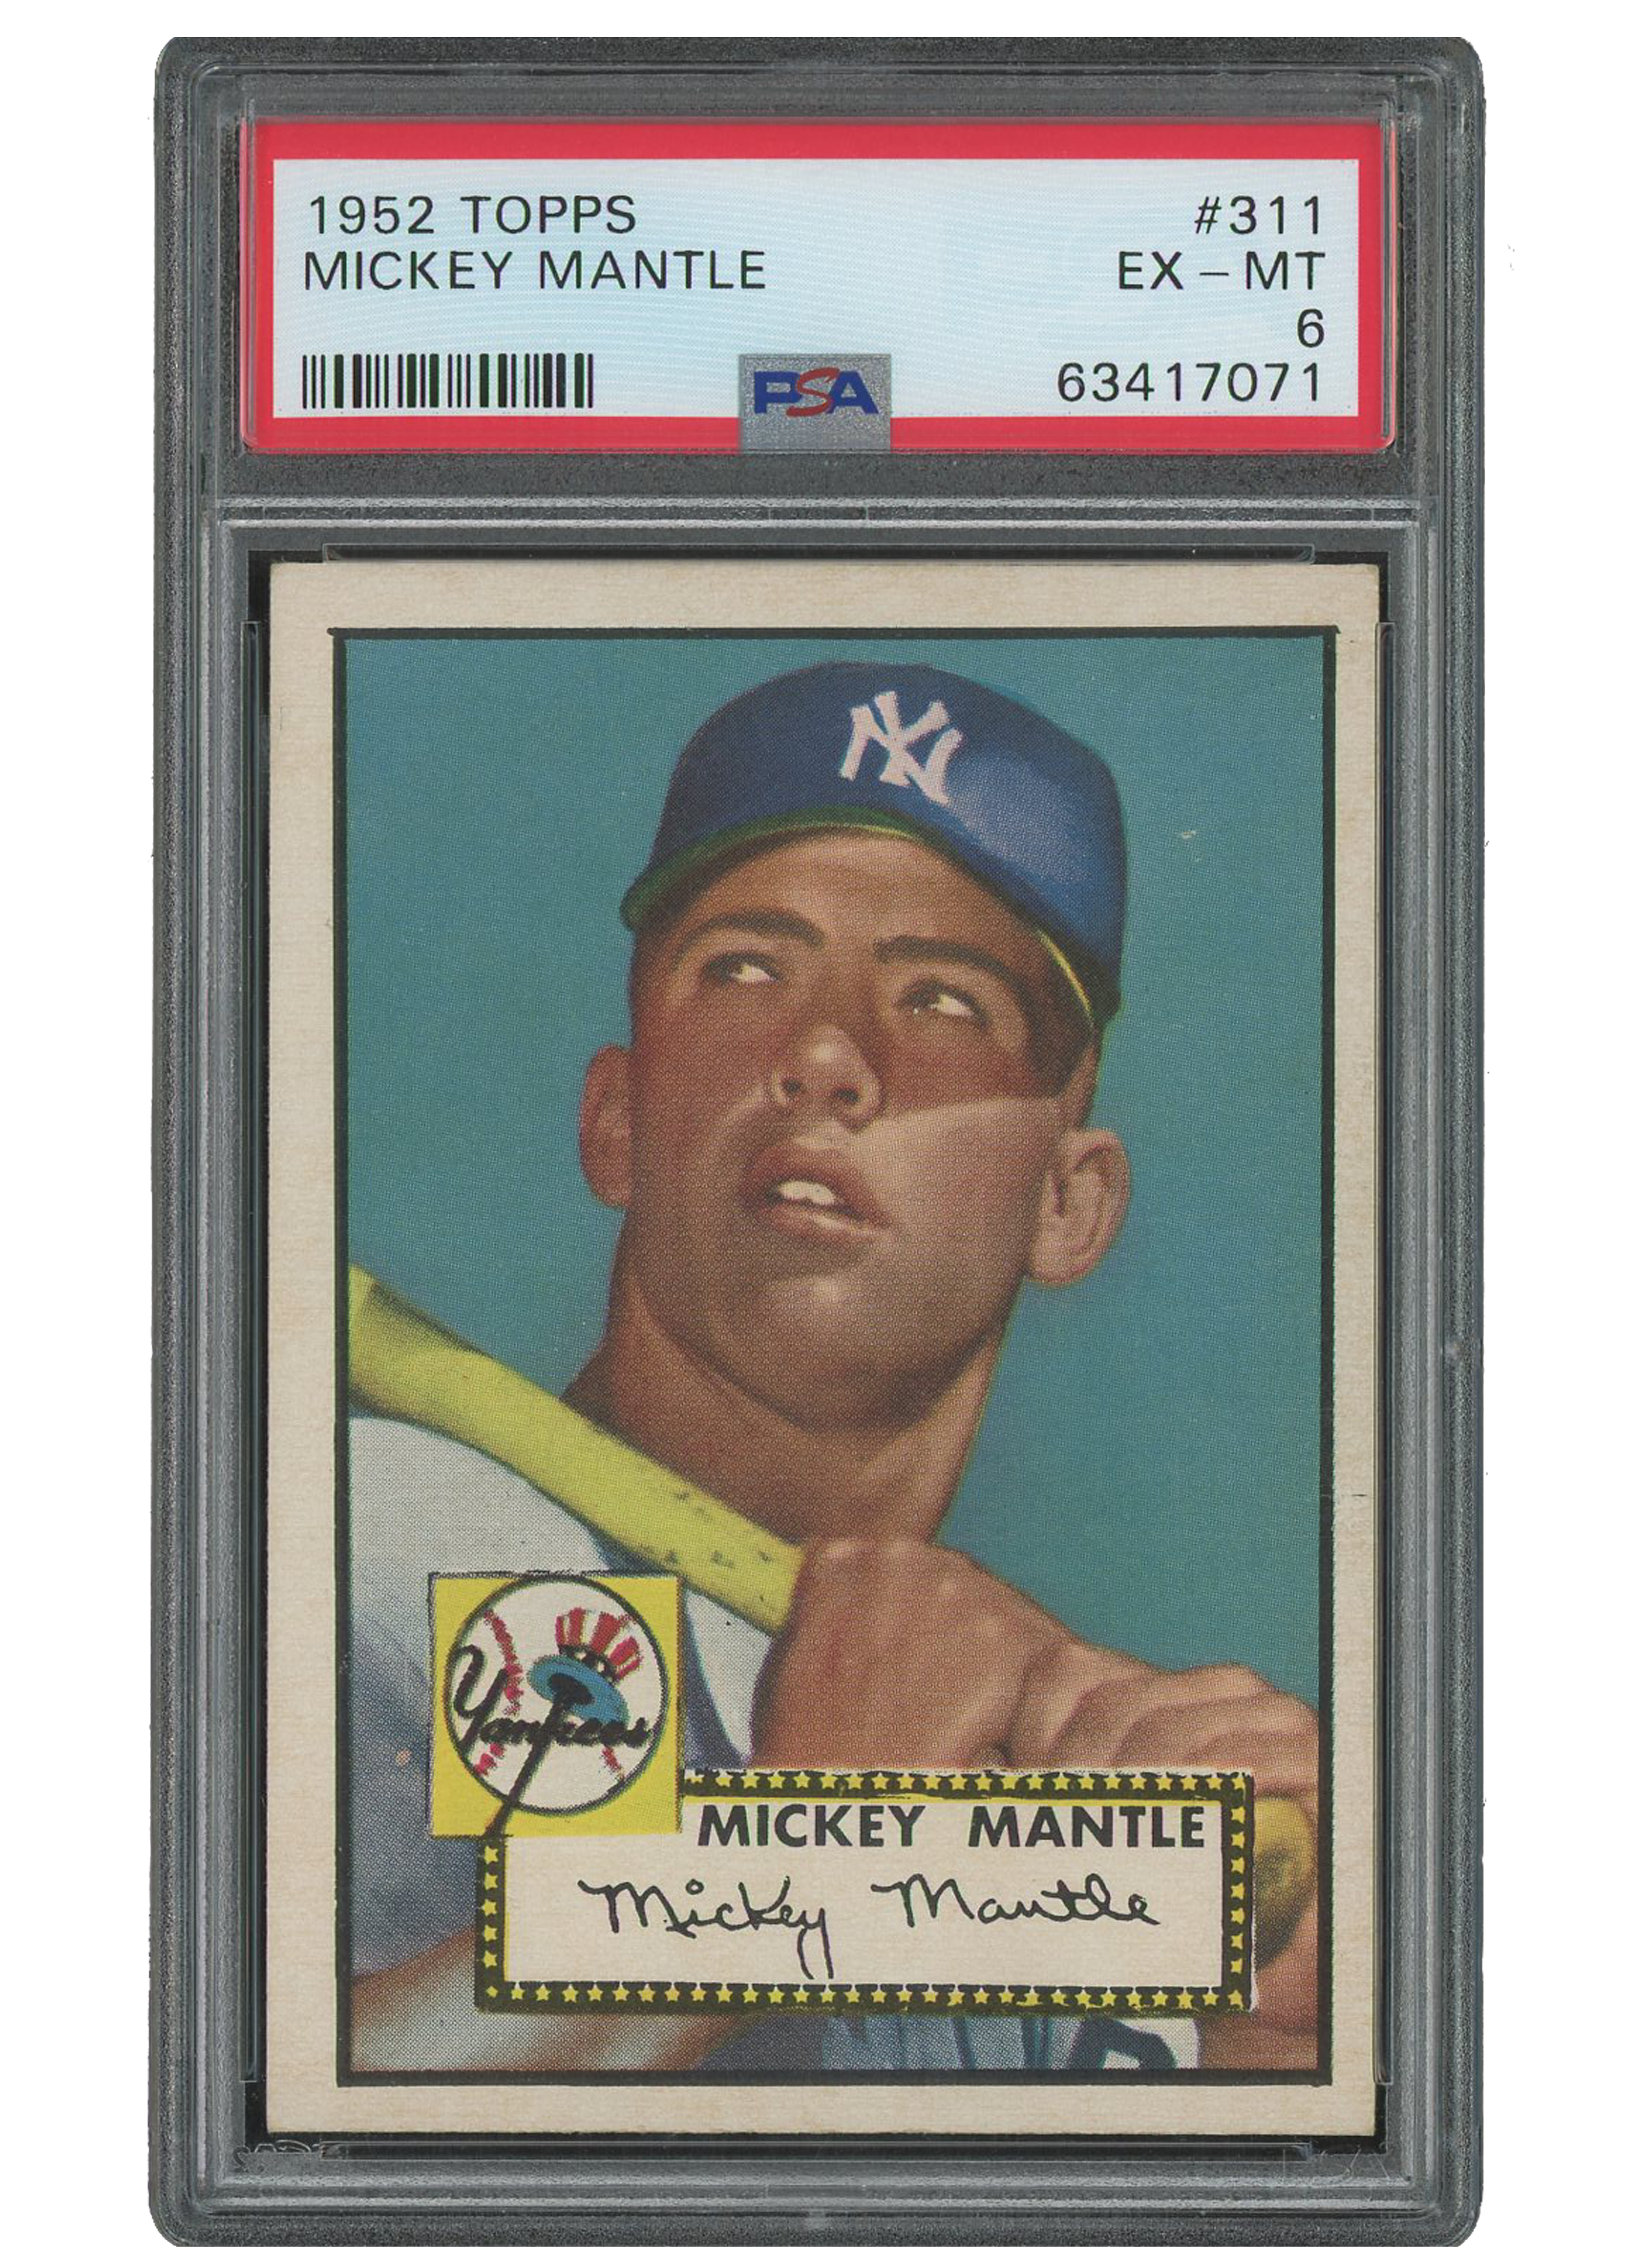 Mickey Mantle's signature through the years - Sports Collectors Digest